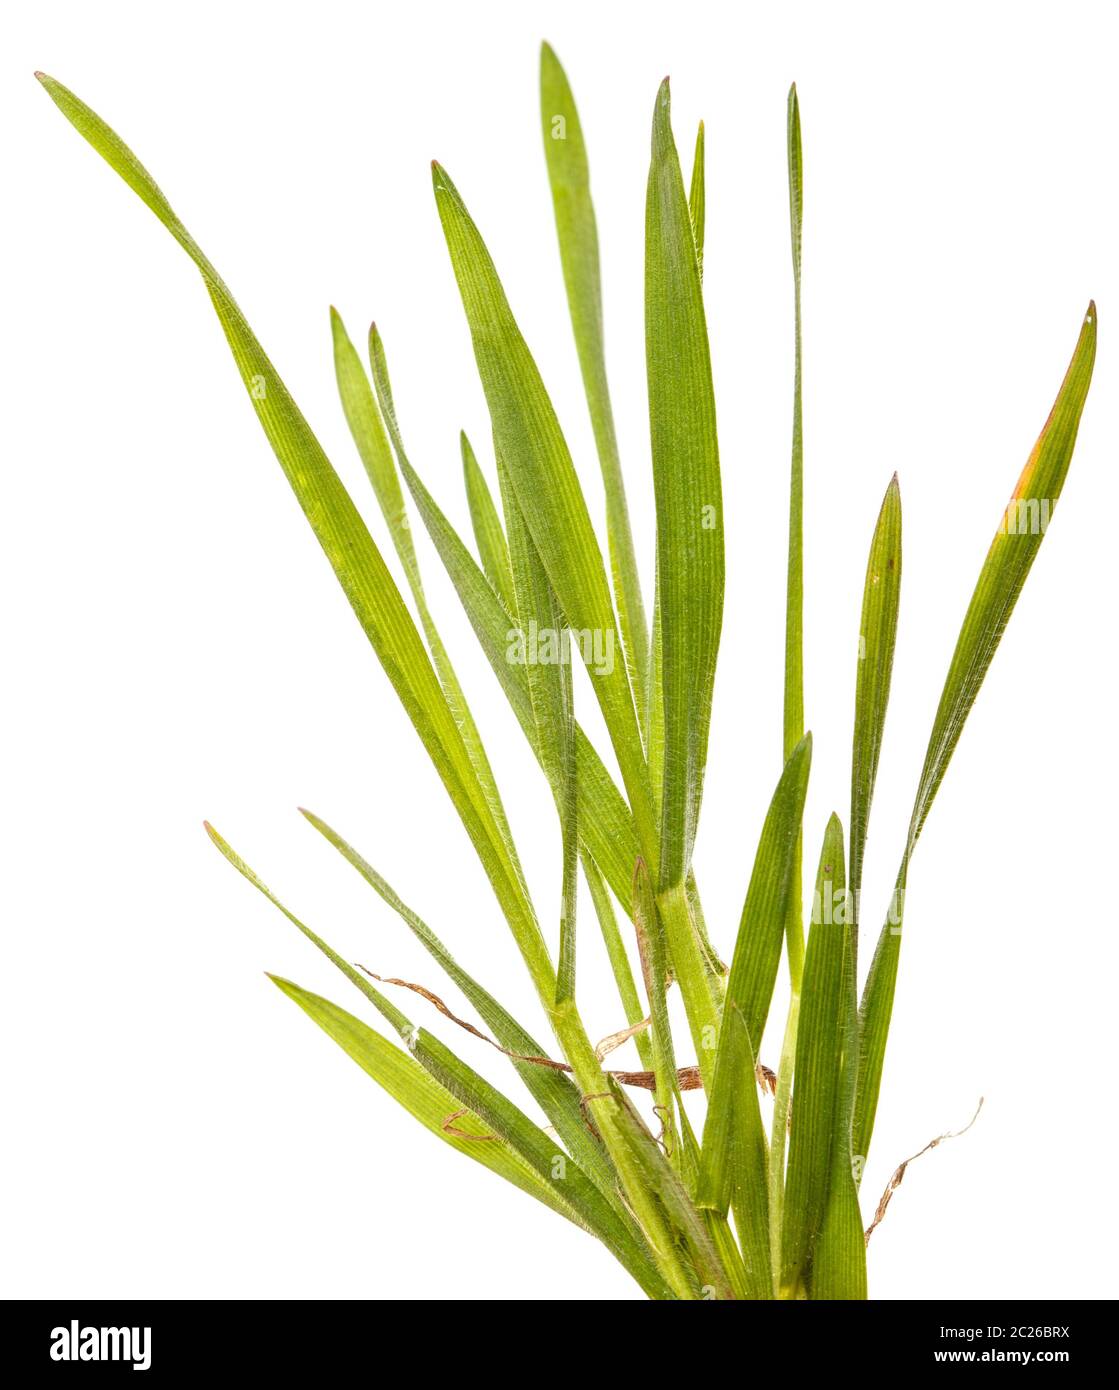 Gazon Green grass isolated on white Banque D'Images